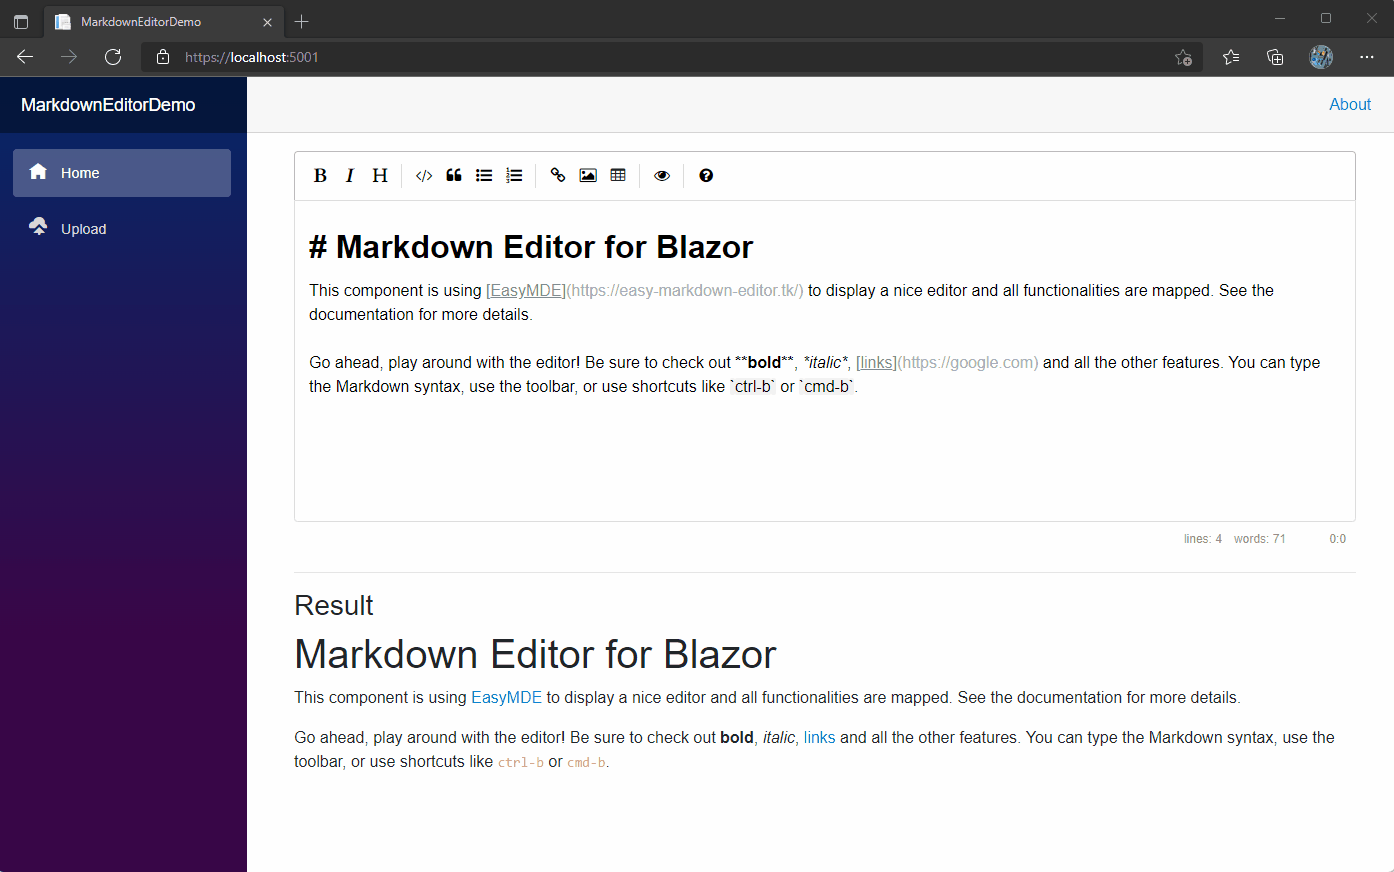 Markdown Editor component for Blazor in action